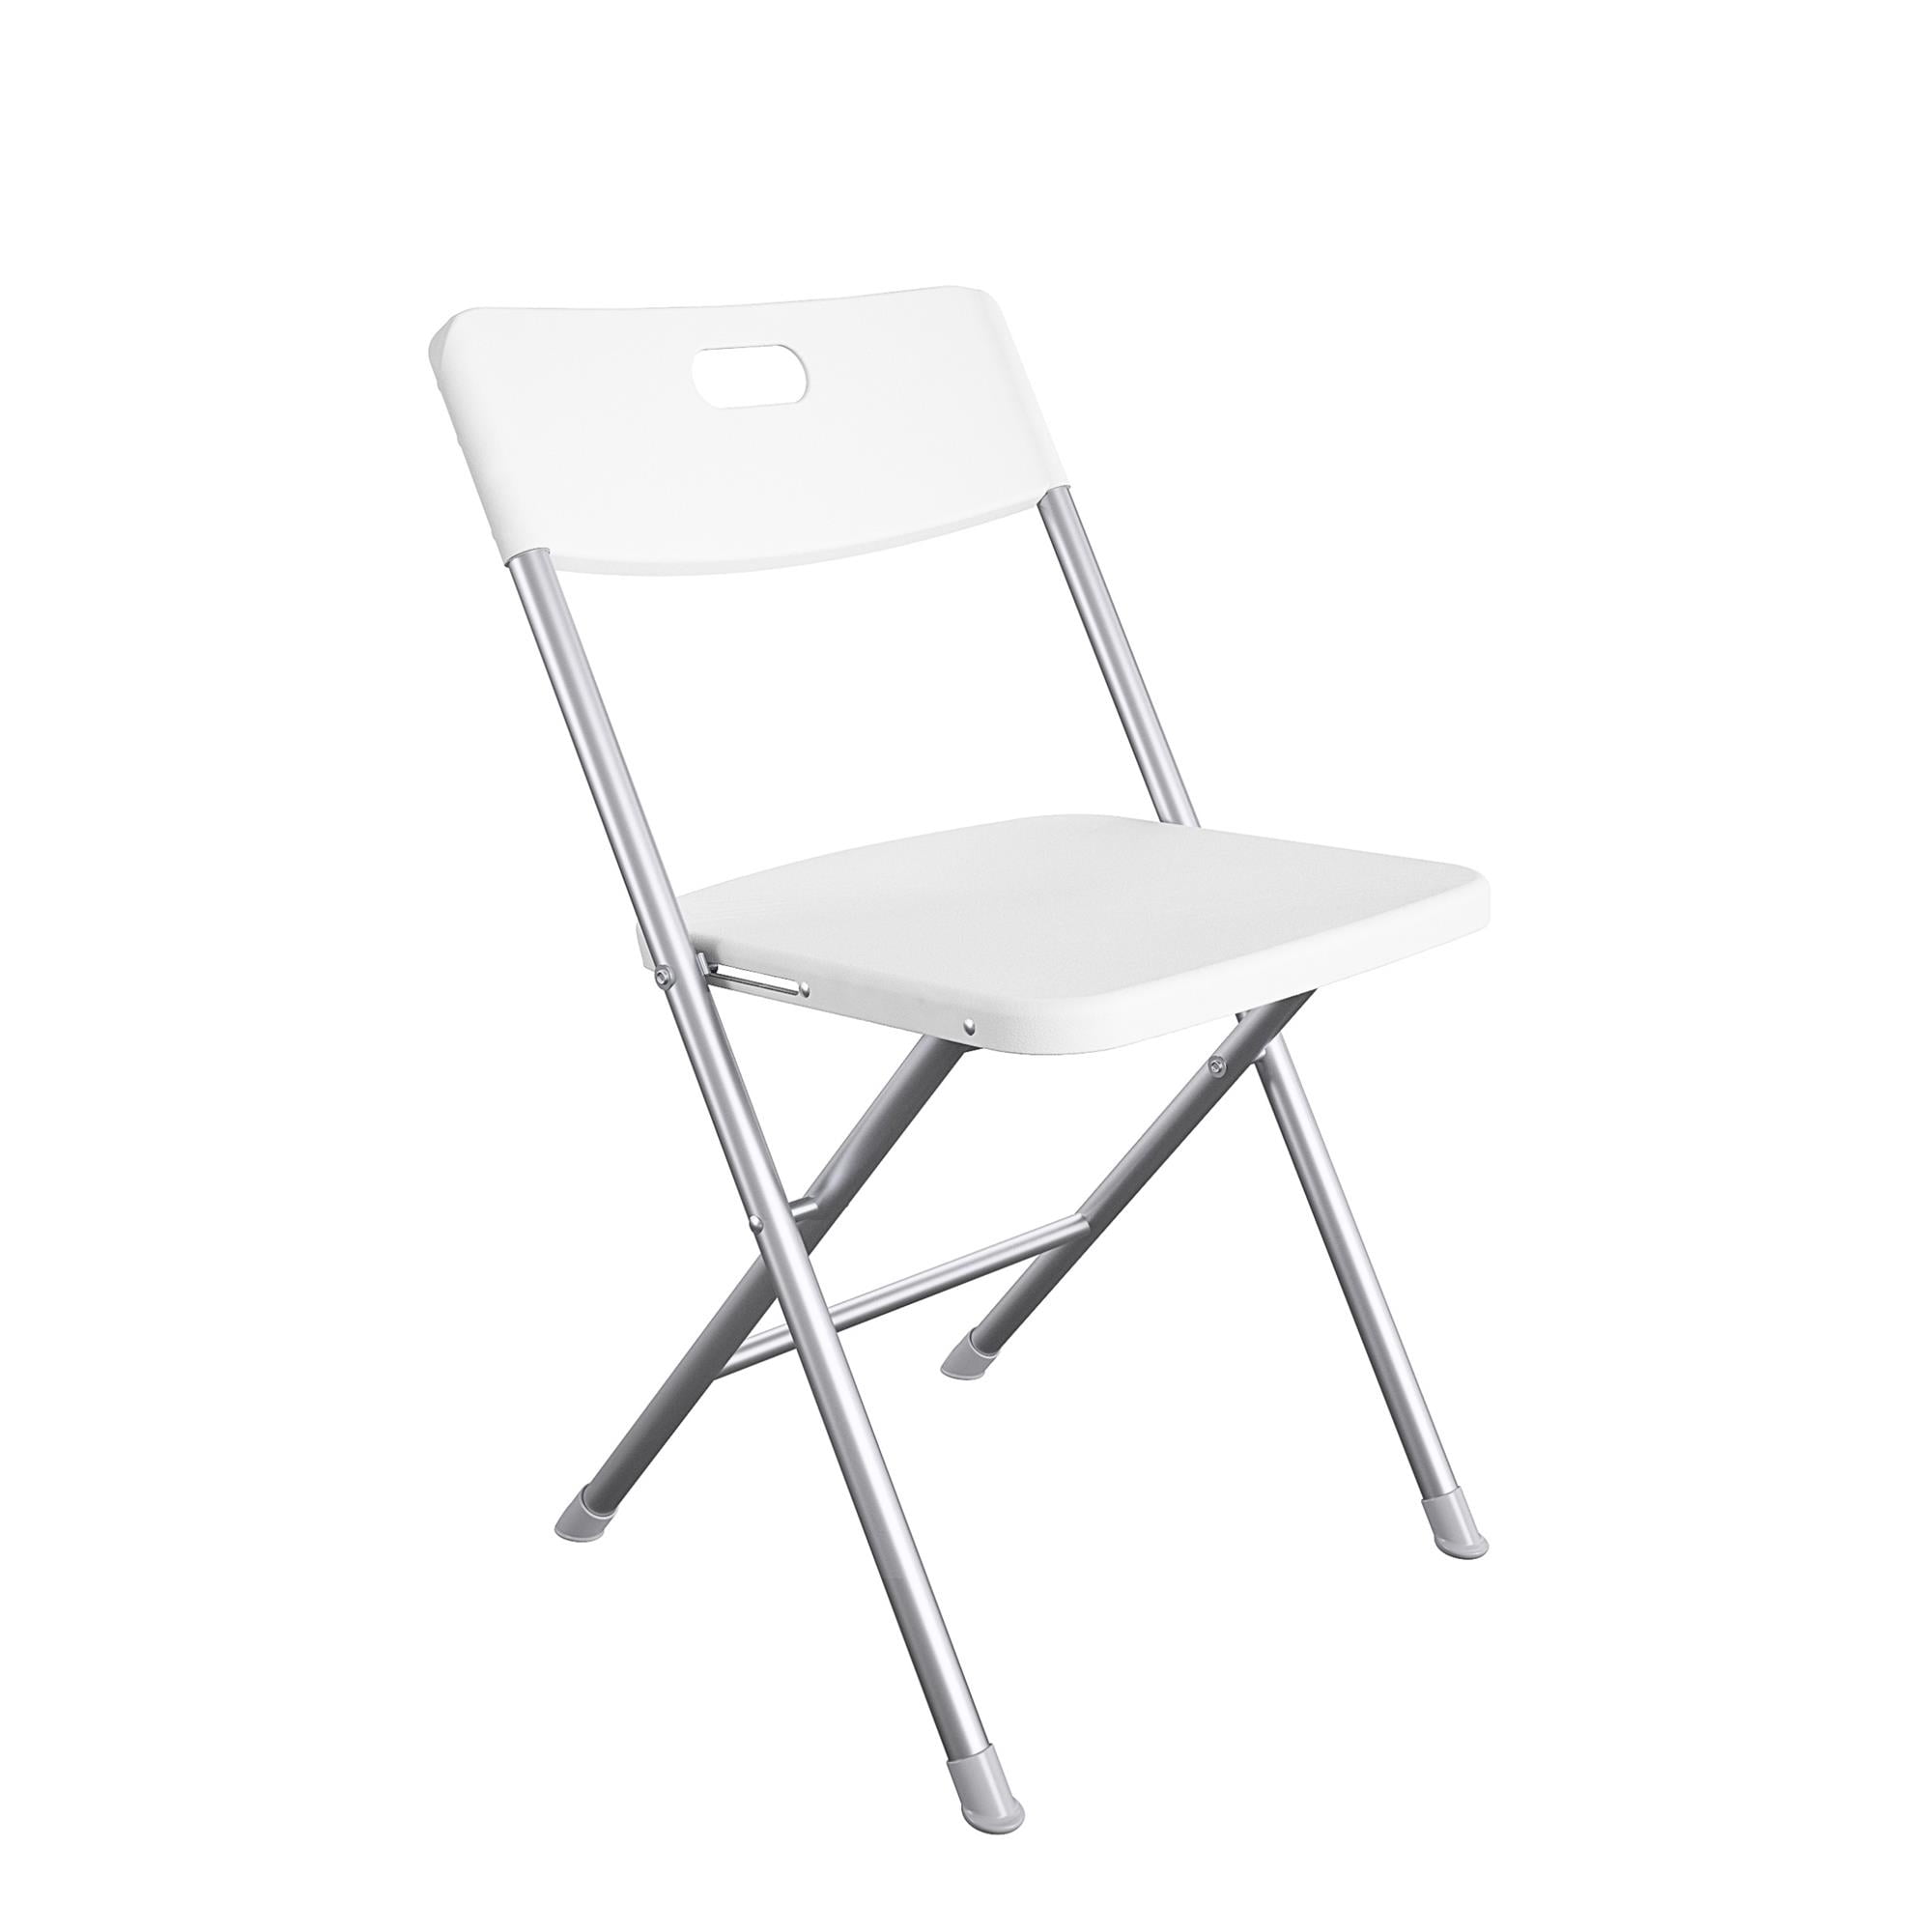 Mainstays Resin Seat & Back Folding Chair, White